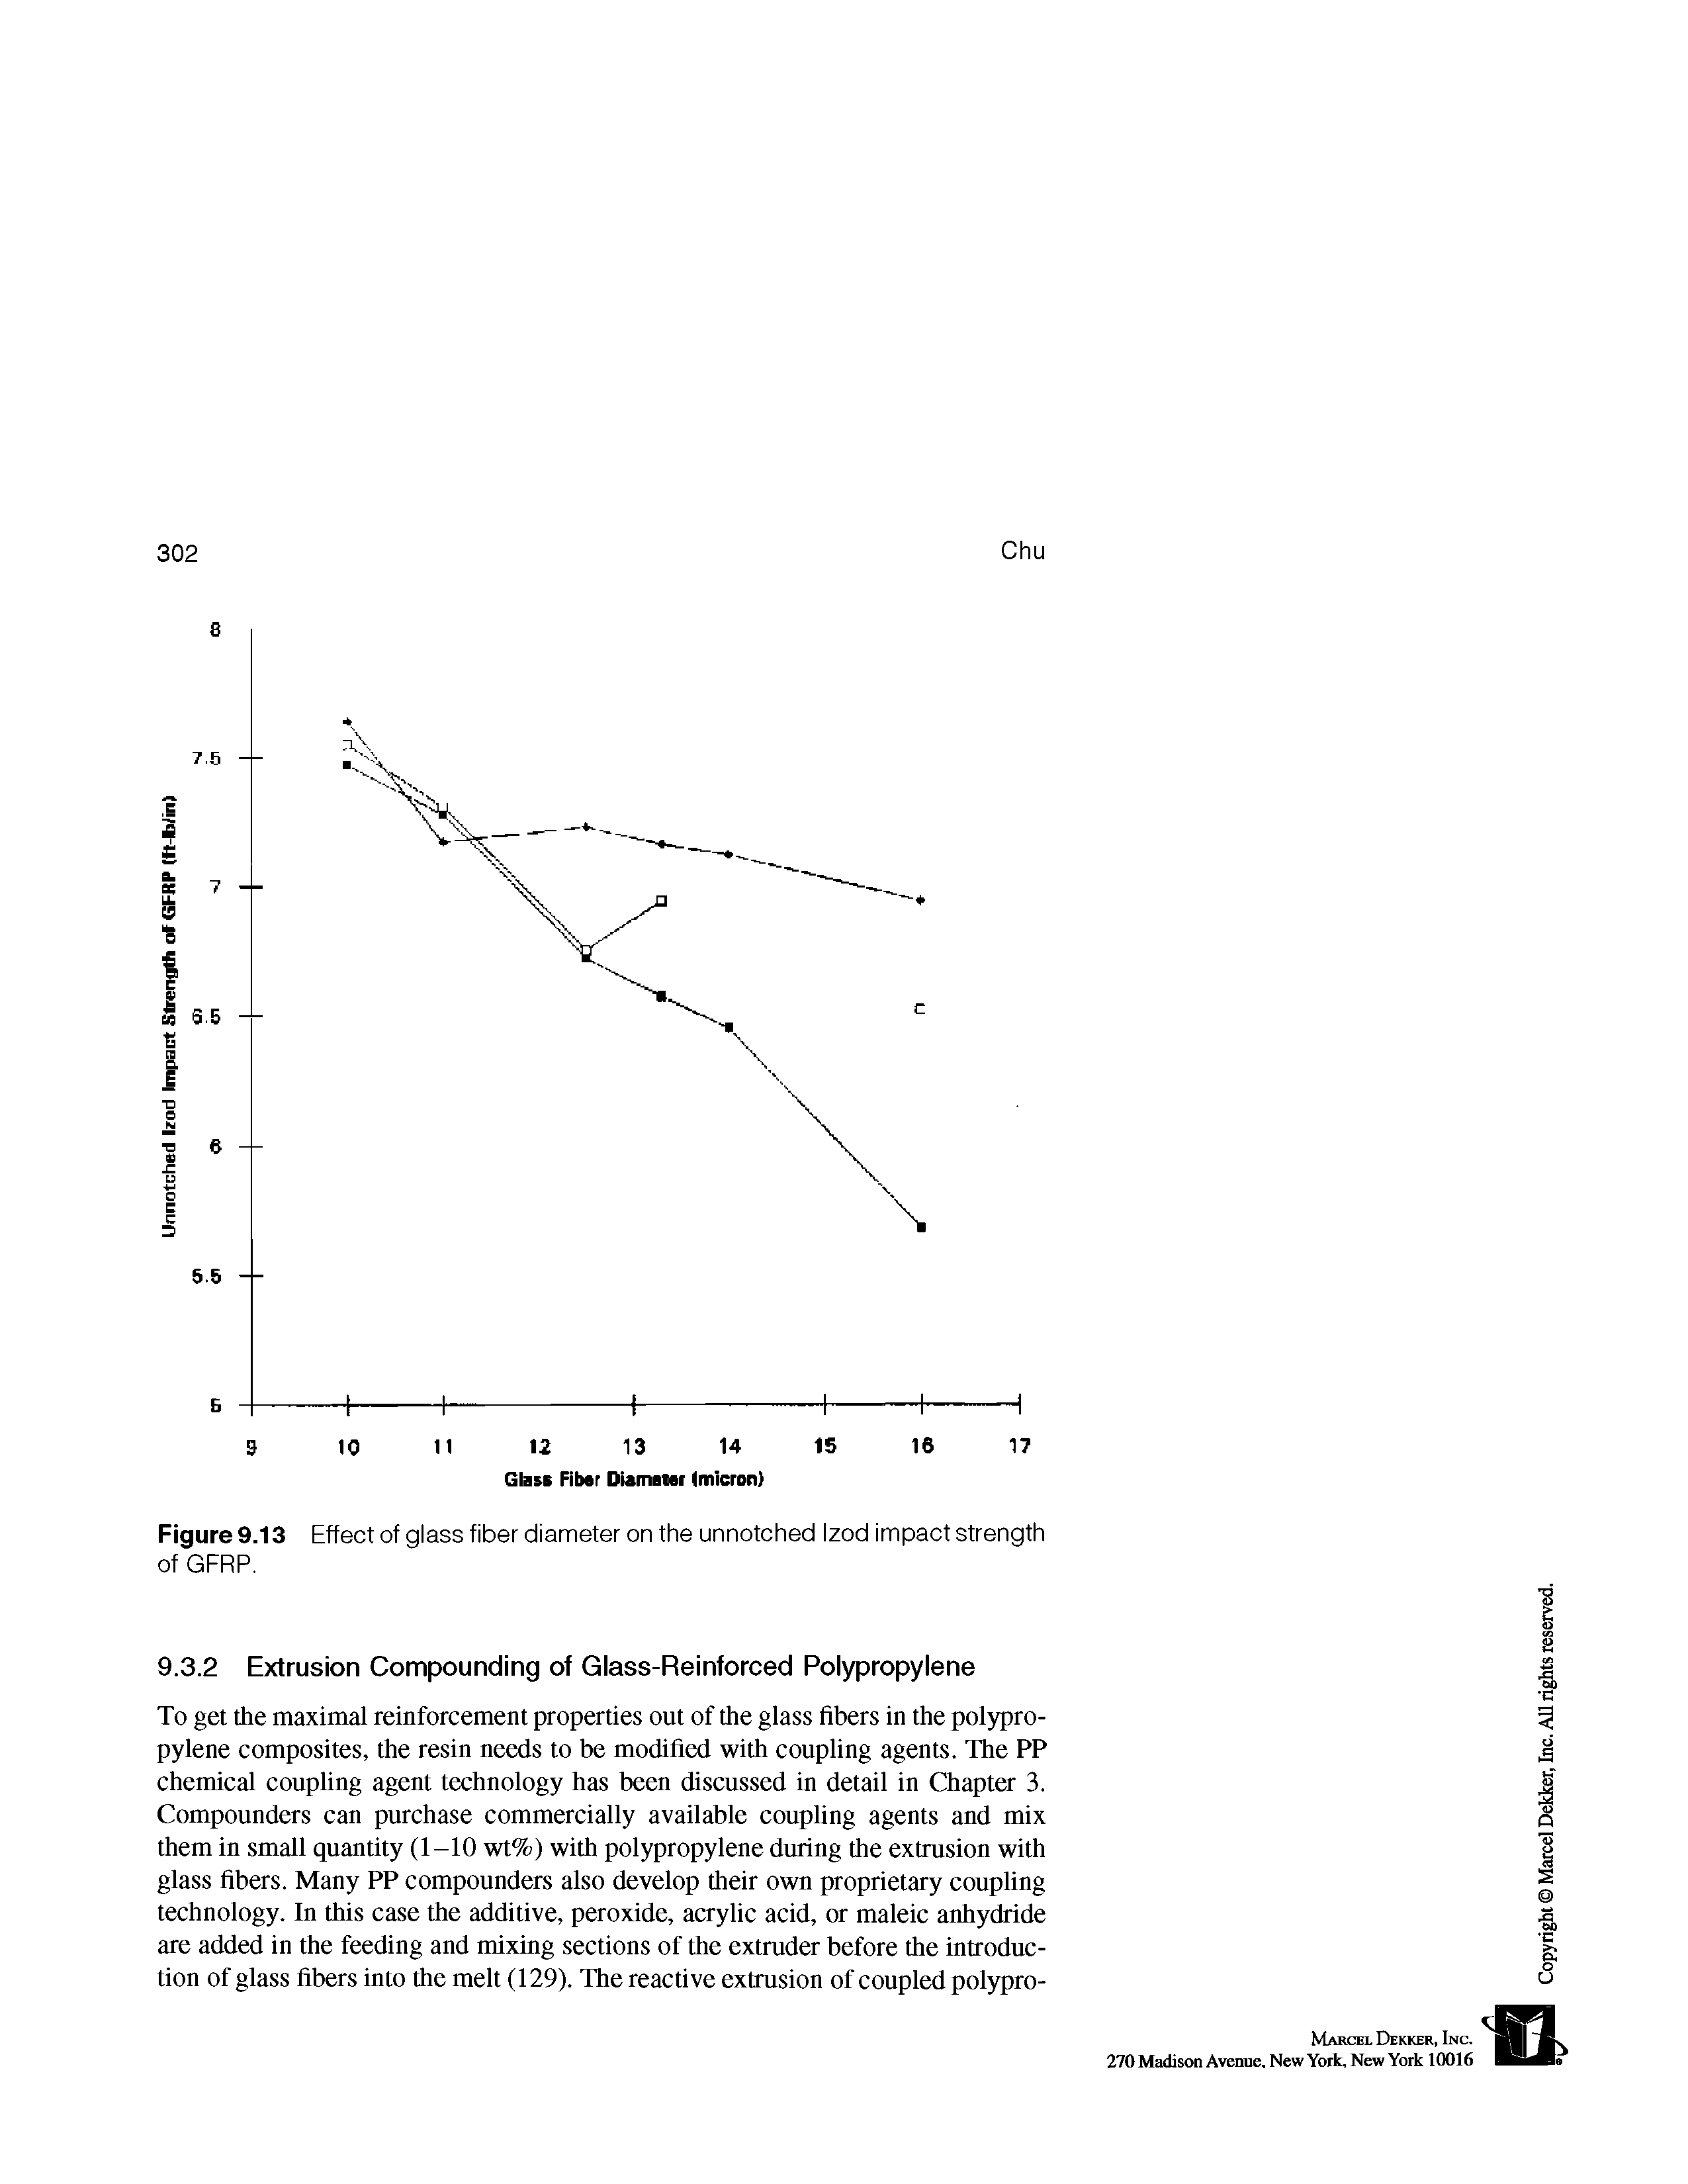 Figure 9.13 Effect of glass fiber diameter on the unnotched Izod impact strength of GFRP.